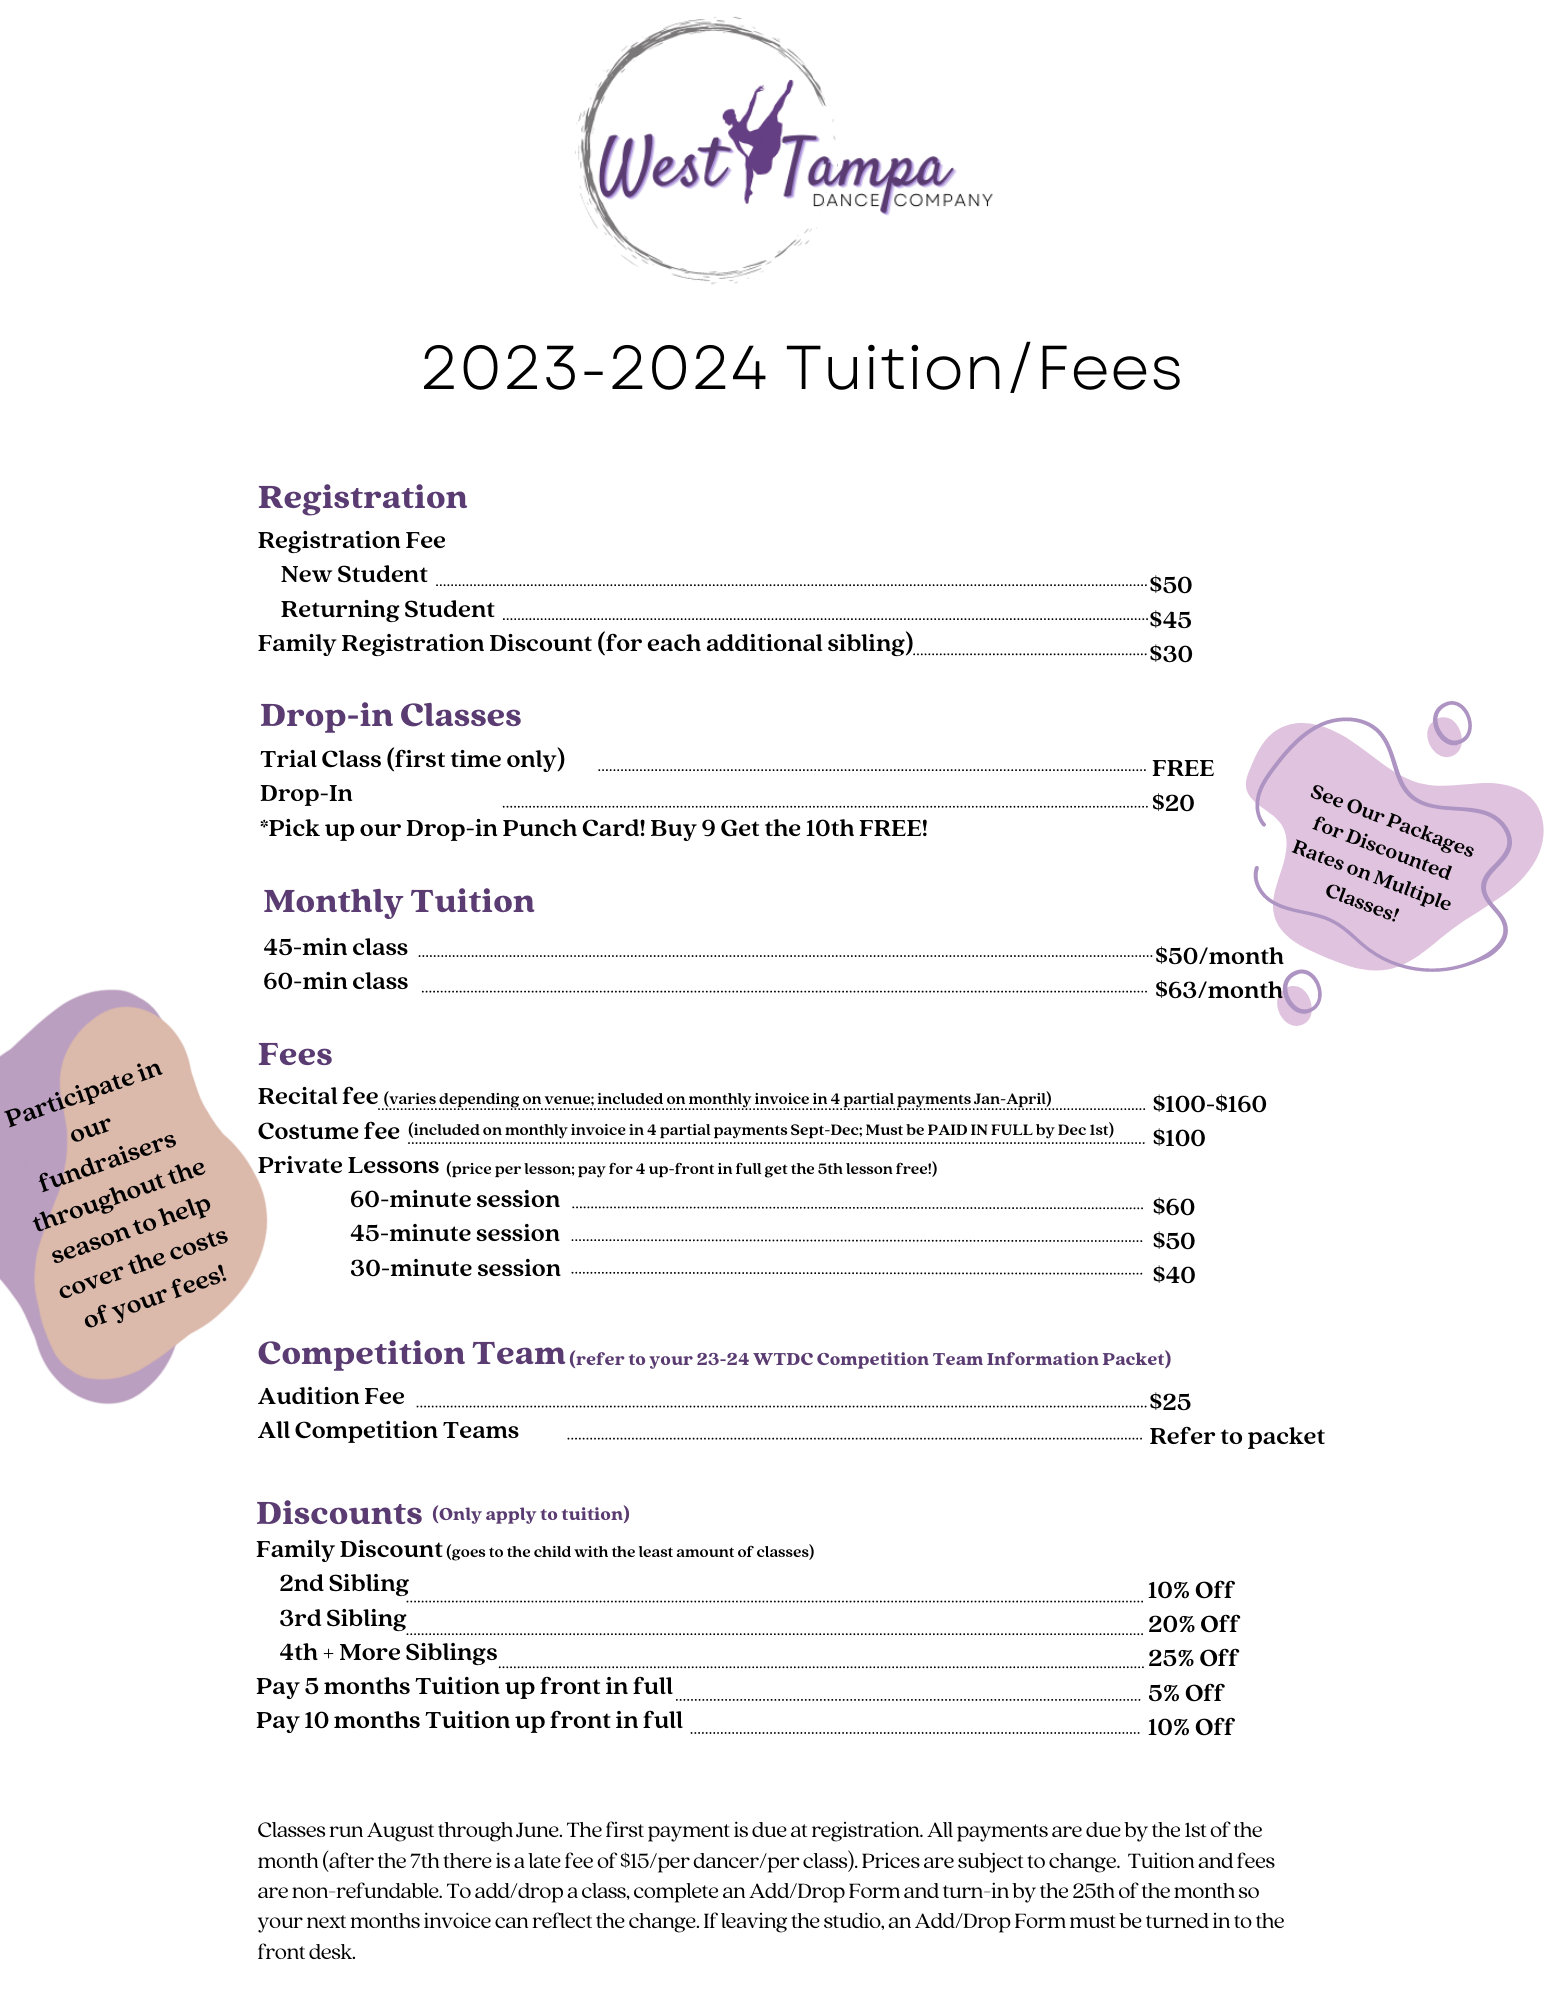 2023-2024 Fall and Spring Pricing